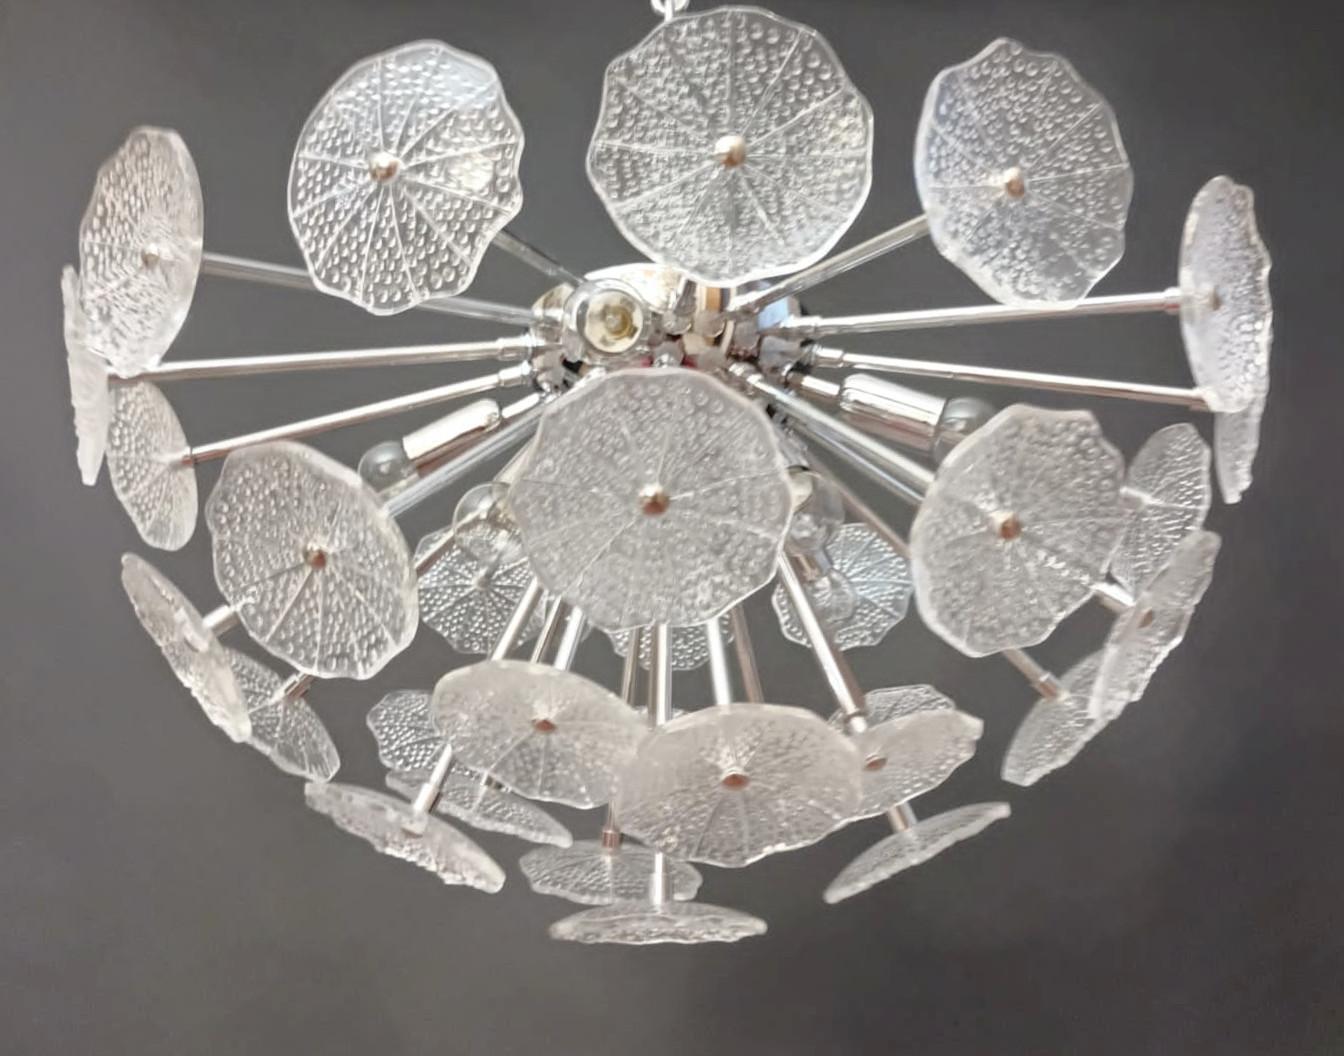 Italian sputnik flush mount or chandelier with vintage 1960s clear textured Murano glass discs, mounted on chrome finish metal frame / designed by Fabio Bergomi for Fabio Ltd / Made in Italy
Measures: Diameter 24.5 inches, height 12.5 inches
8